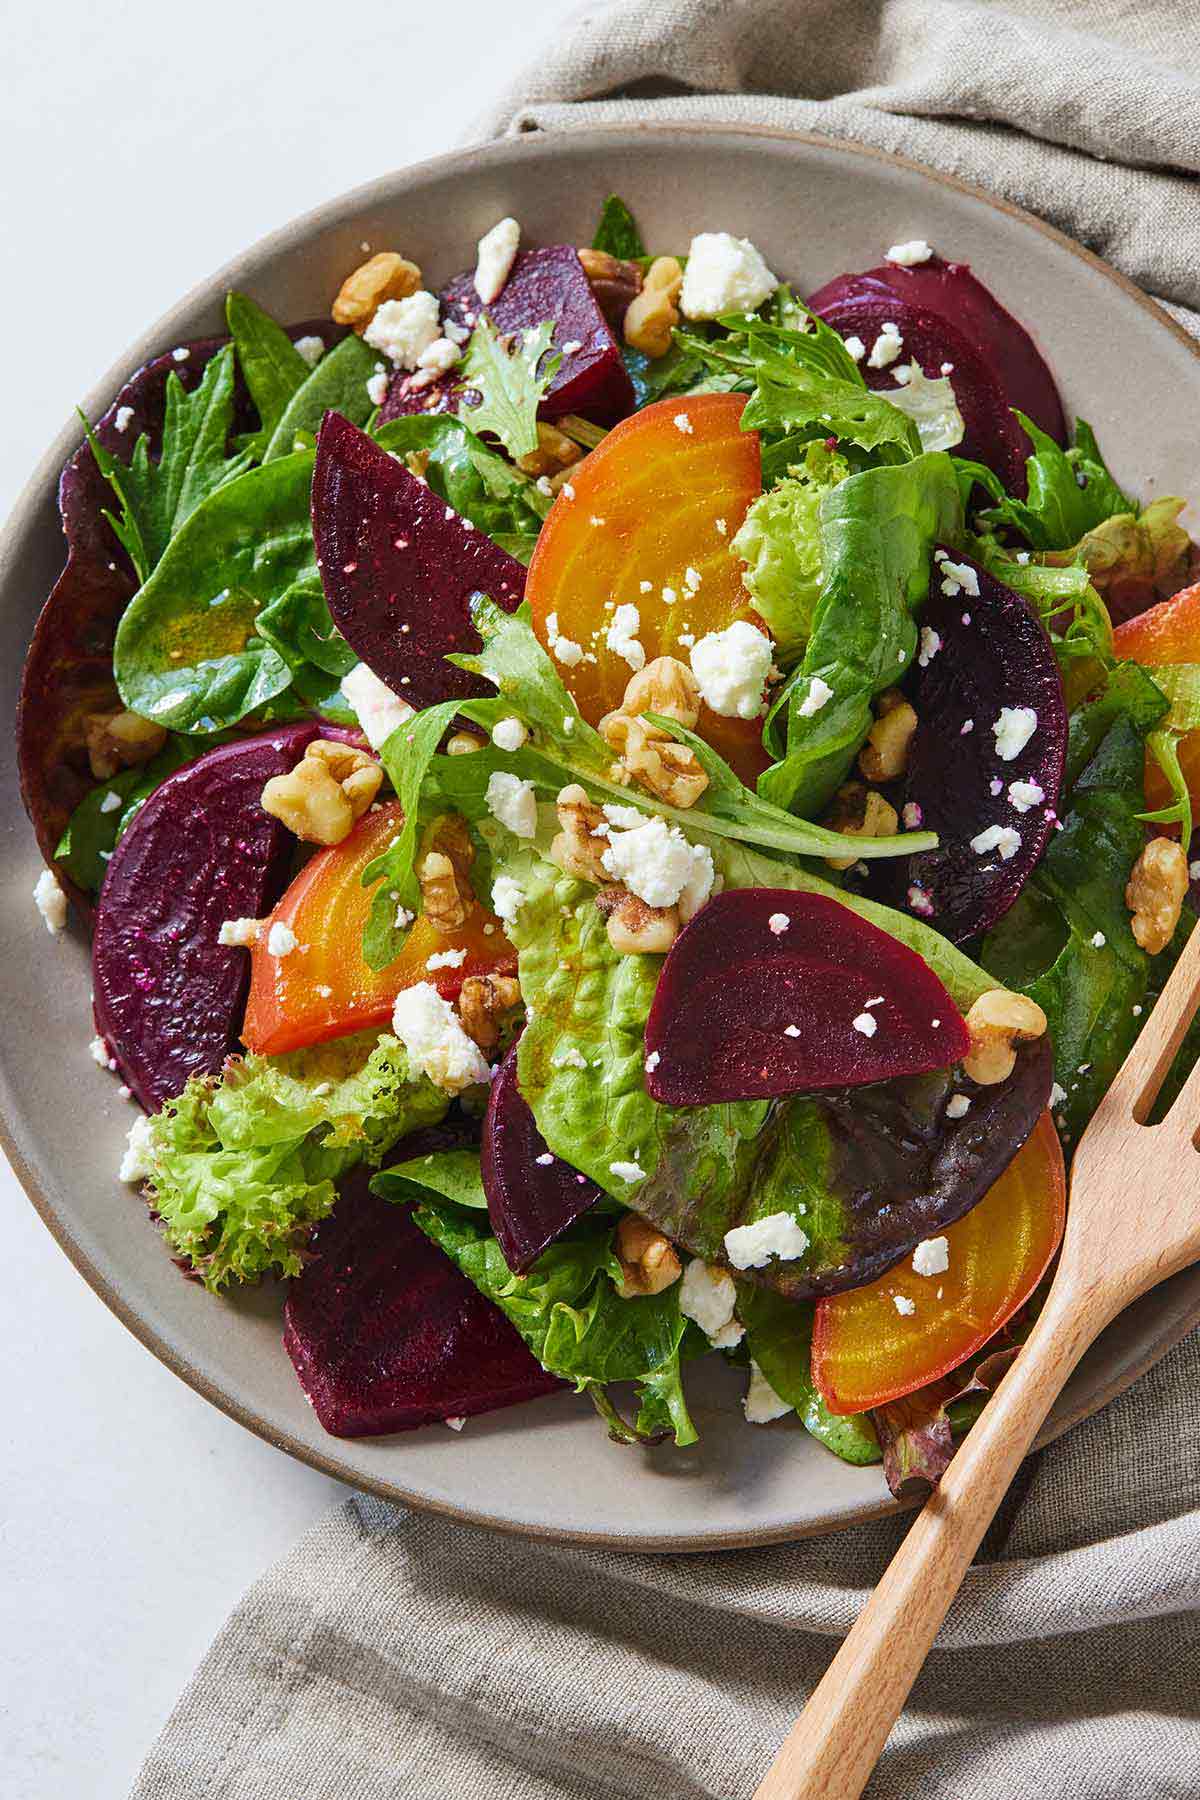 Overhead view of a plate of beet salad with a fork in the plate.